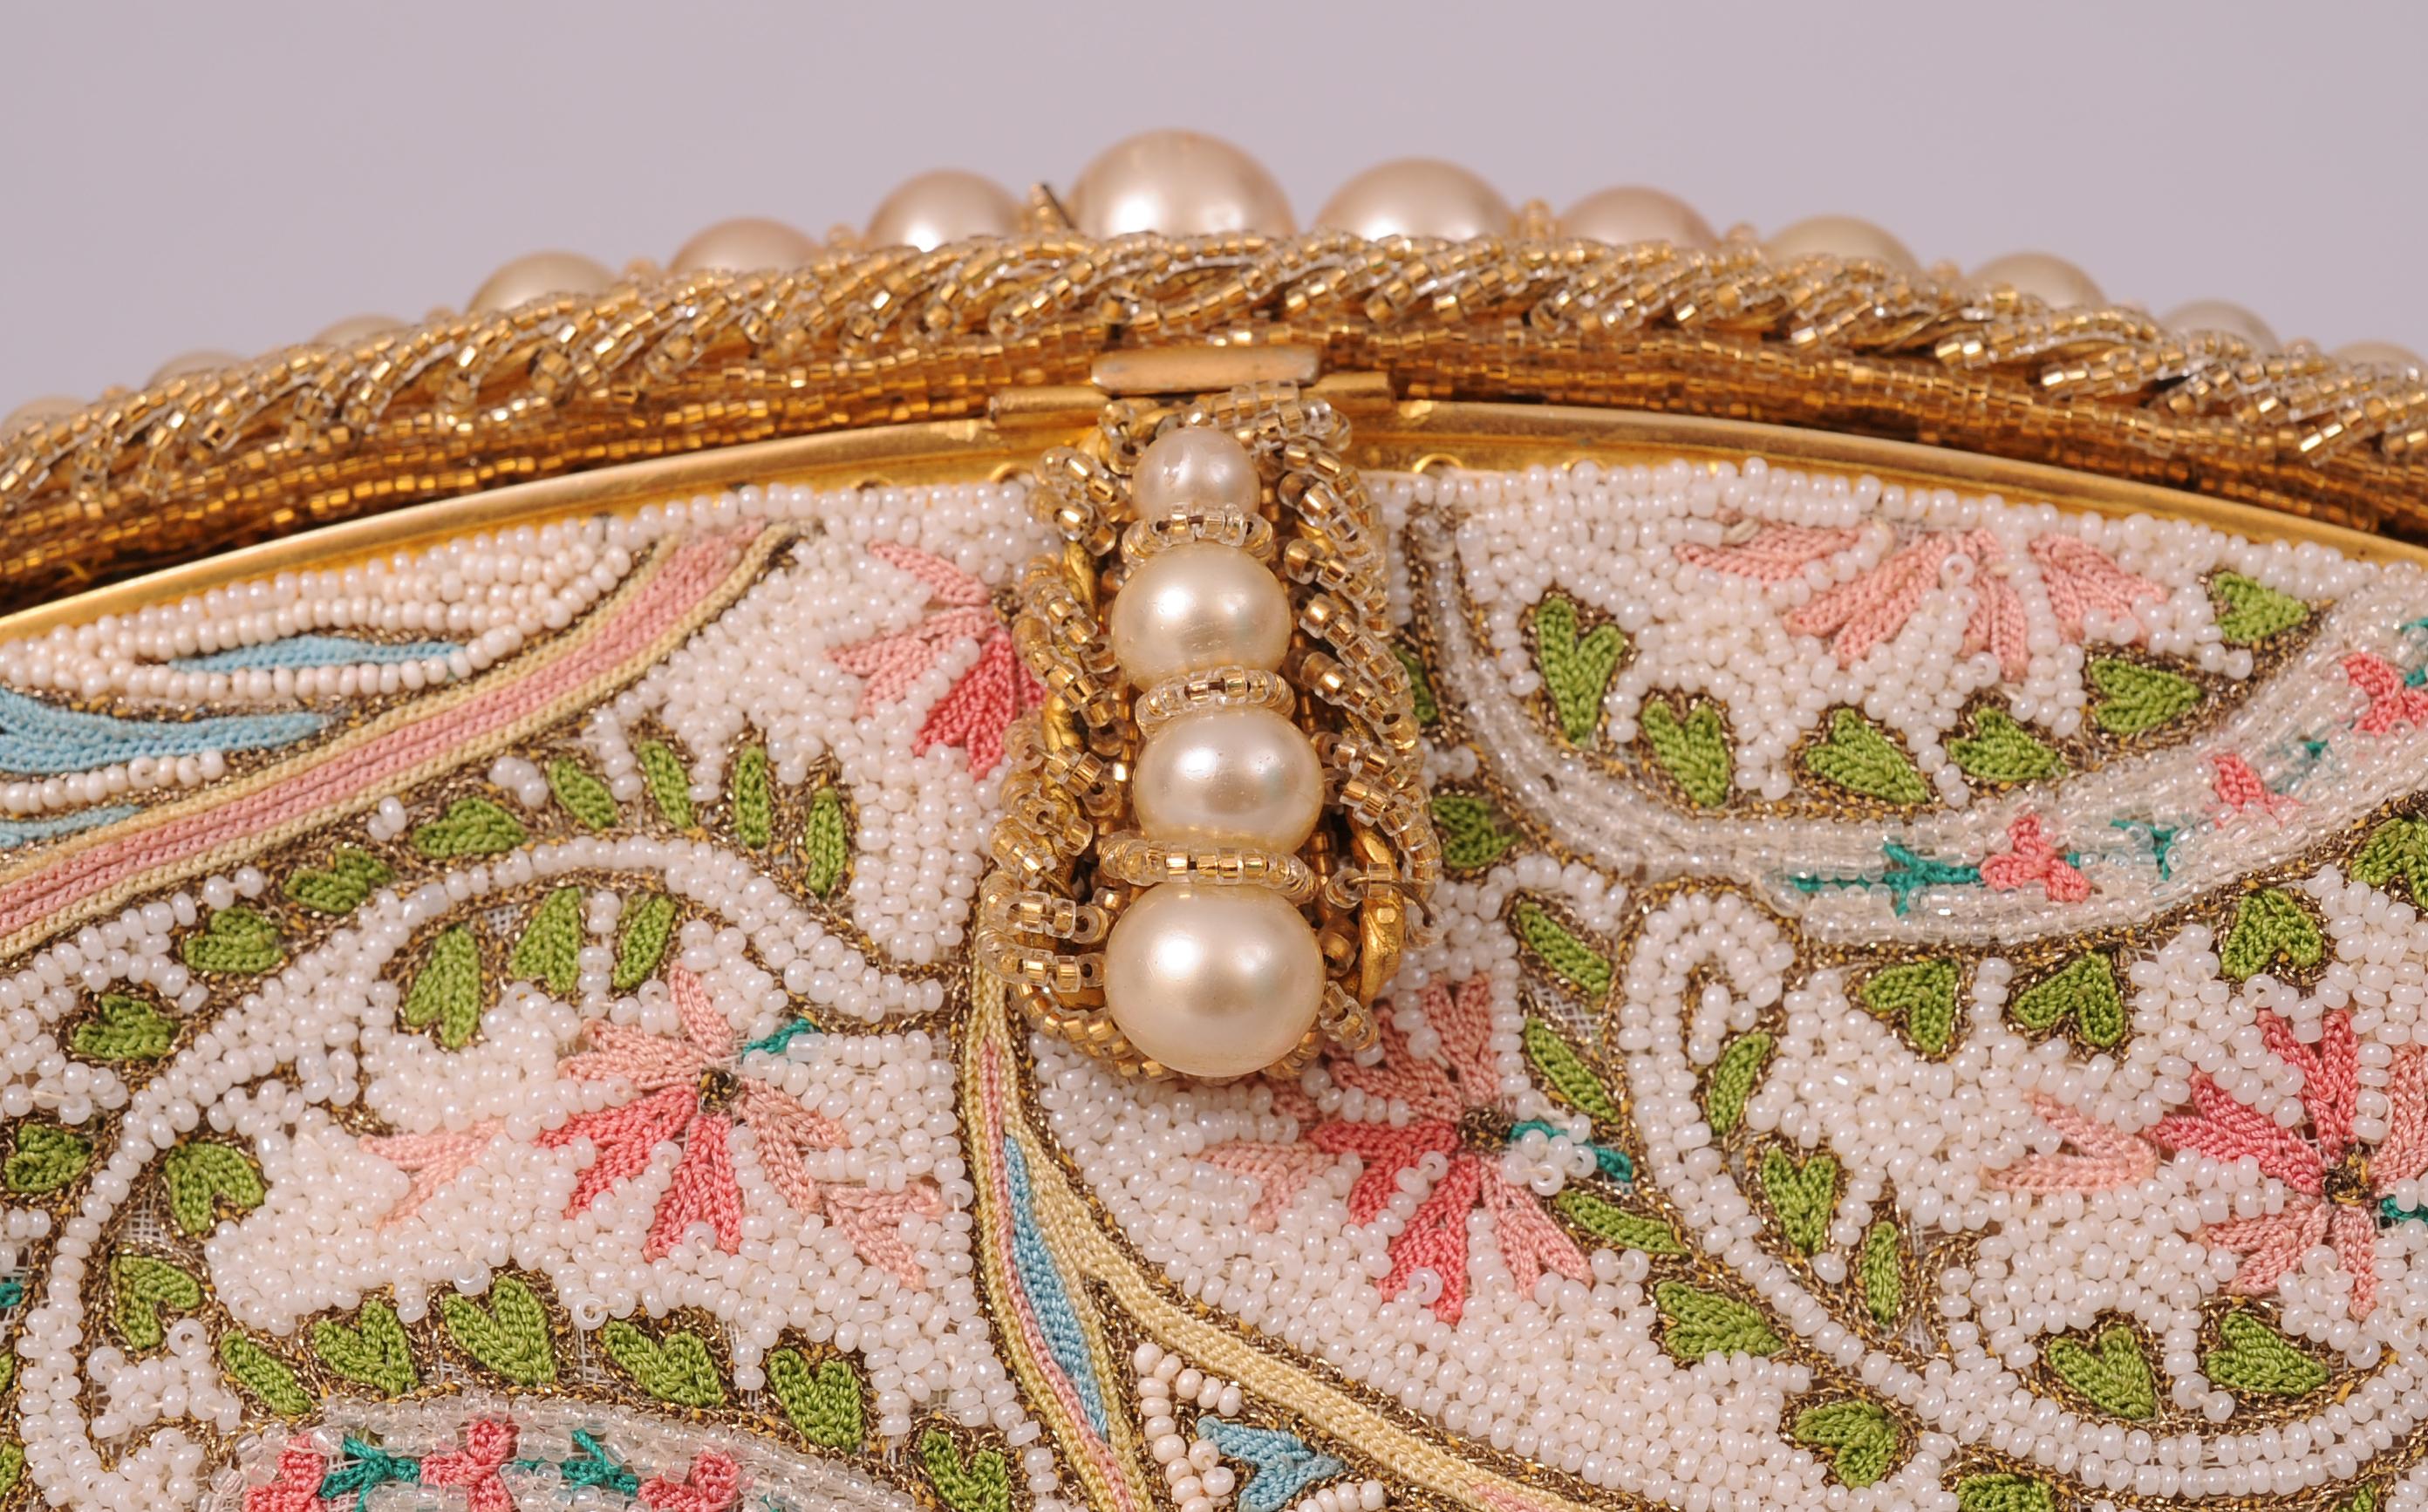 This is the most beautifully beaded and embroidered Josef bag that I have ever offered for sale. It is completely hand beaded in France with white and pearl caviar beads forming the background for the beautiful pastel and gold metallic embroidery.